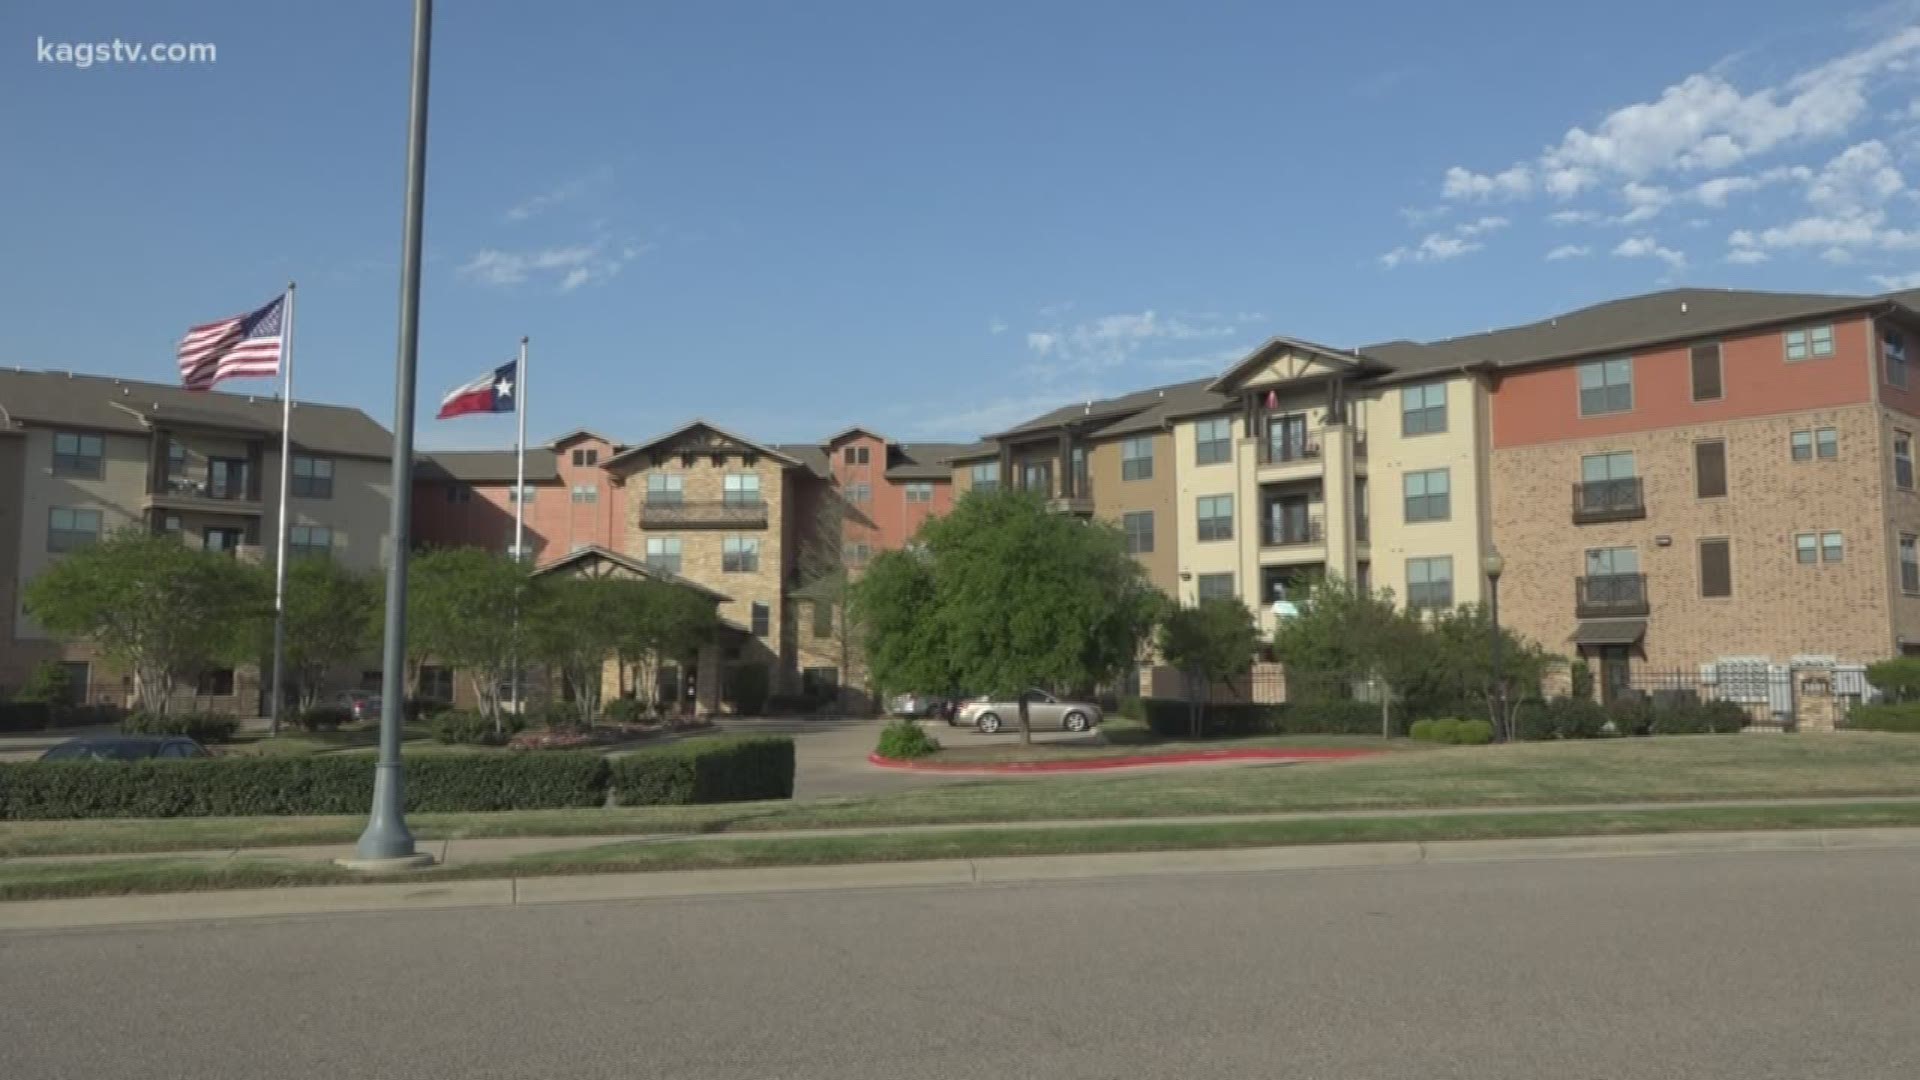 Watercrest at Bryan is making the most of social distancing rules with "Hallway Happy Hours" and a spring parade residents watched from their balconies!